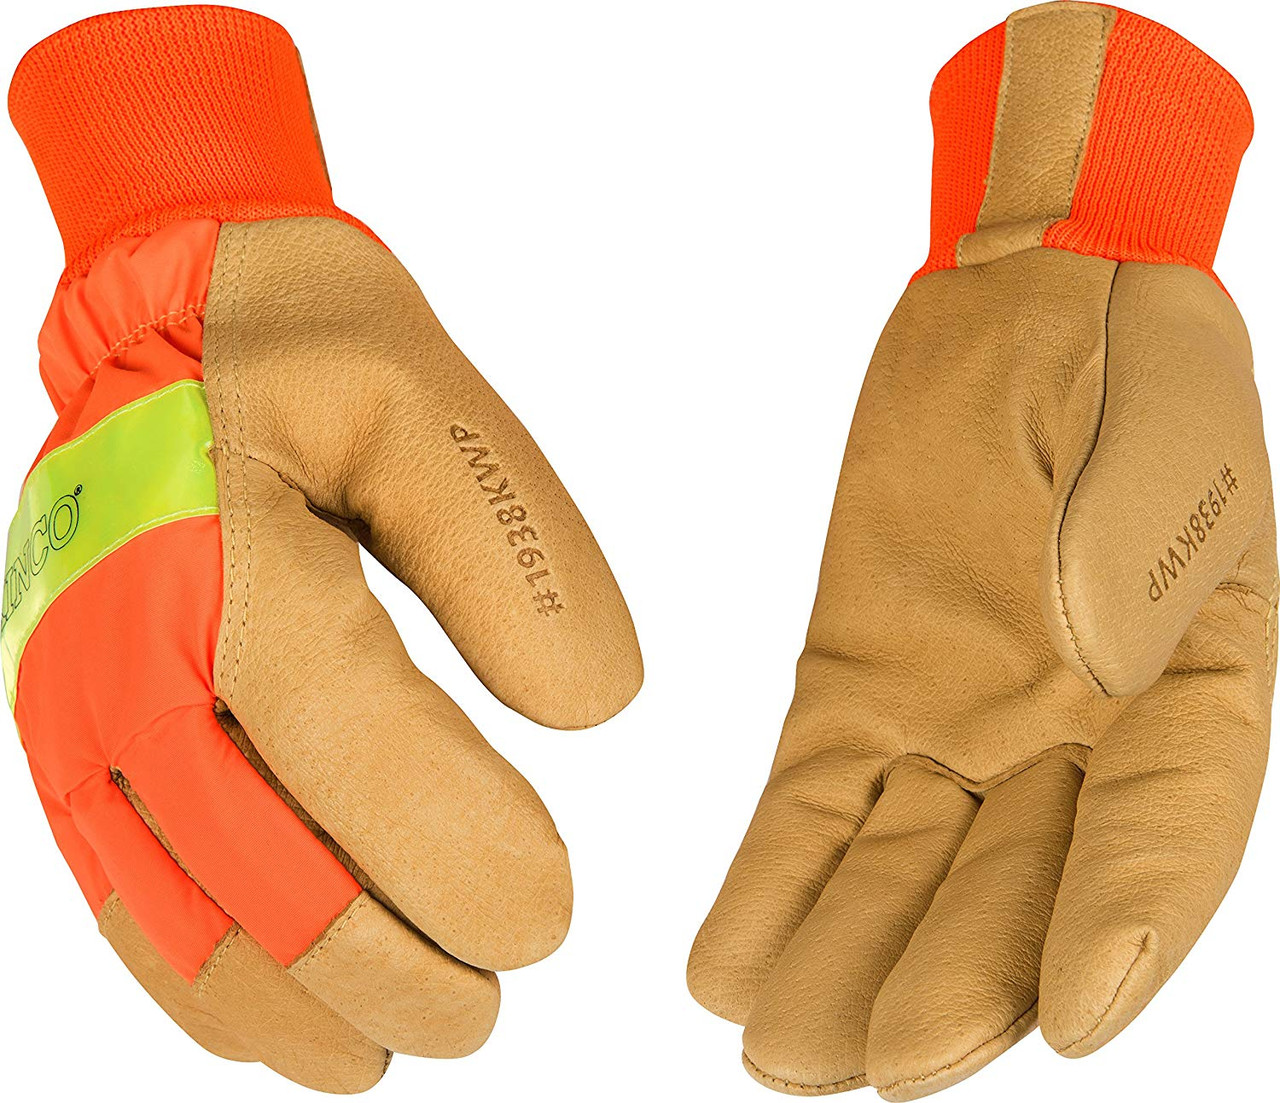 Kinco 1790 Warm Grip Form Fitting Gloves Size Large Set of 2 Pair for sale online 